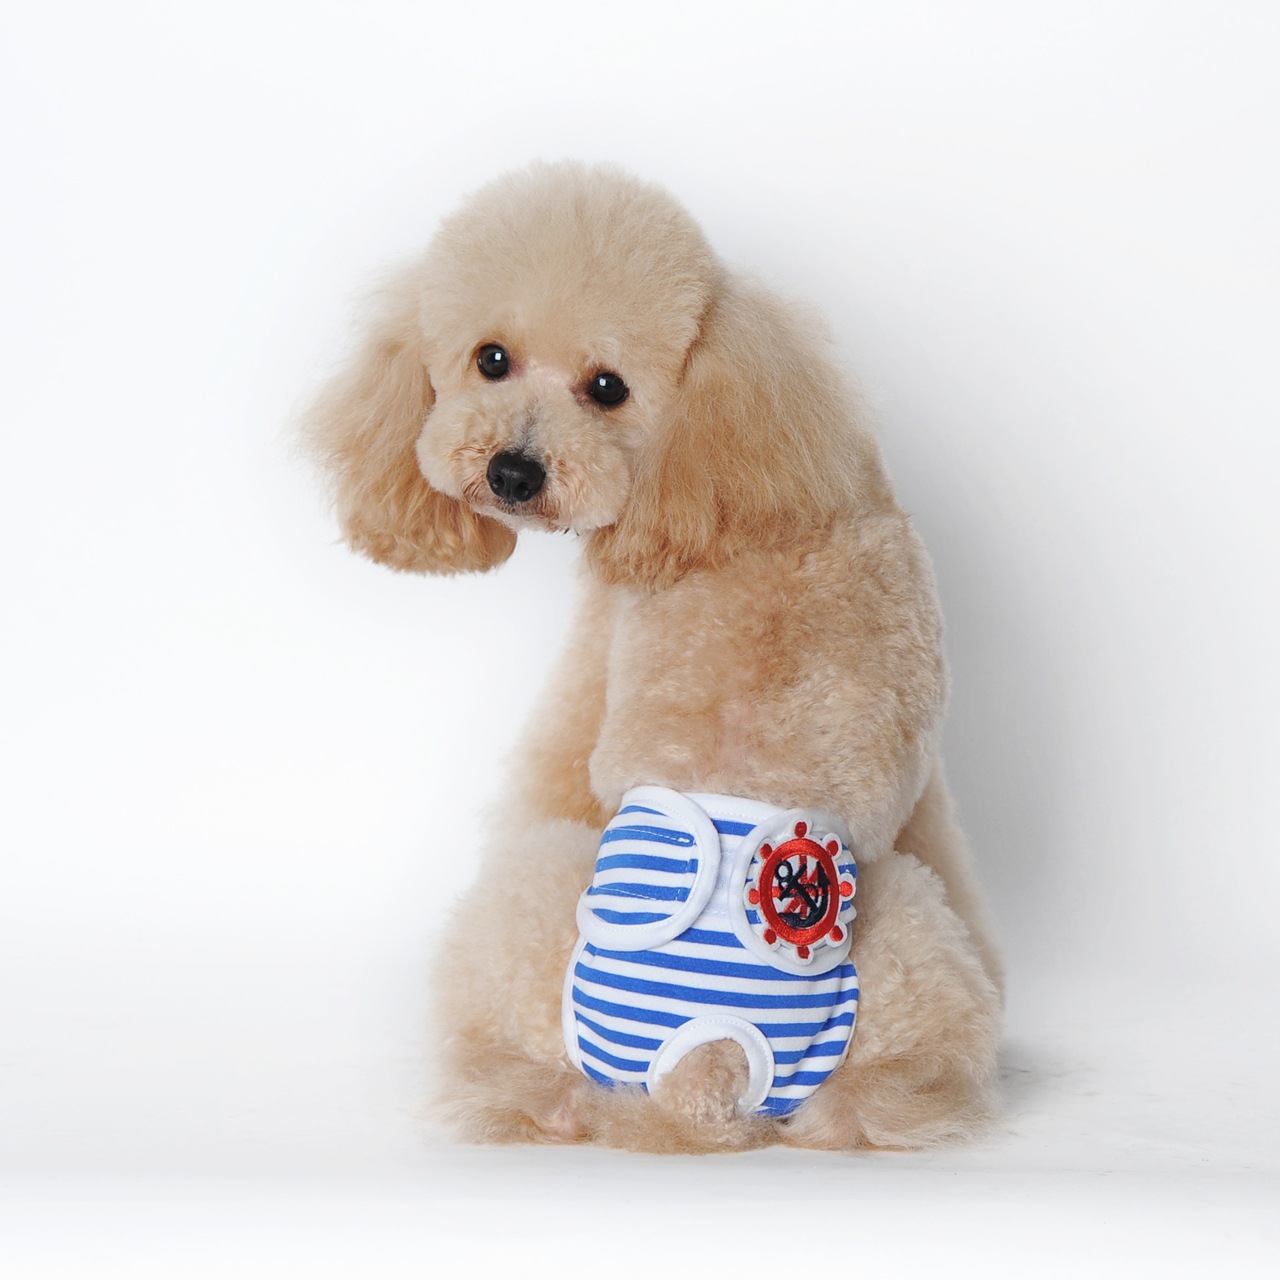 Hot Selling Pet Physiological Sanitary Panties Reusable Female Dog Diapers With Adjustable Tighten Strap